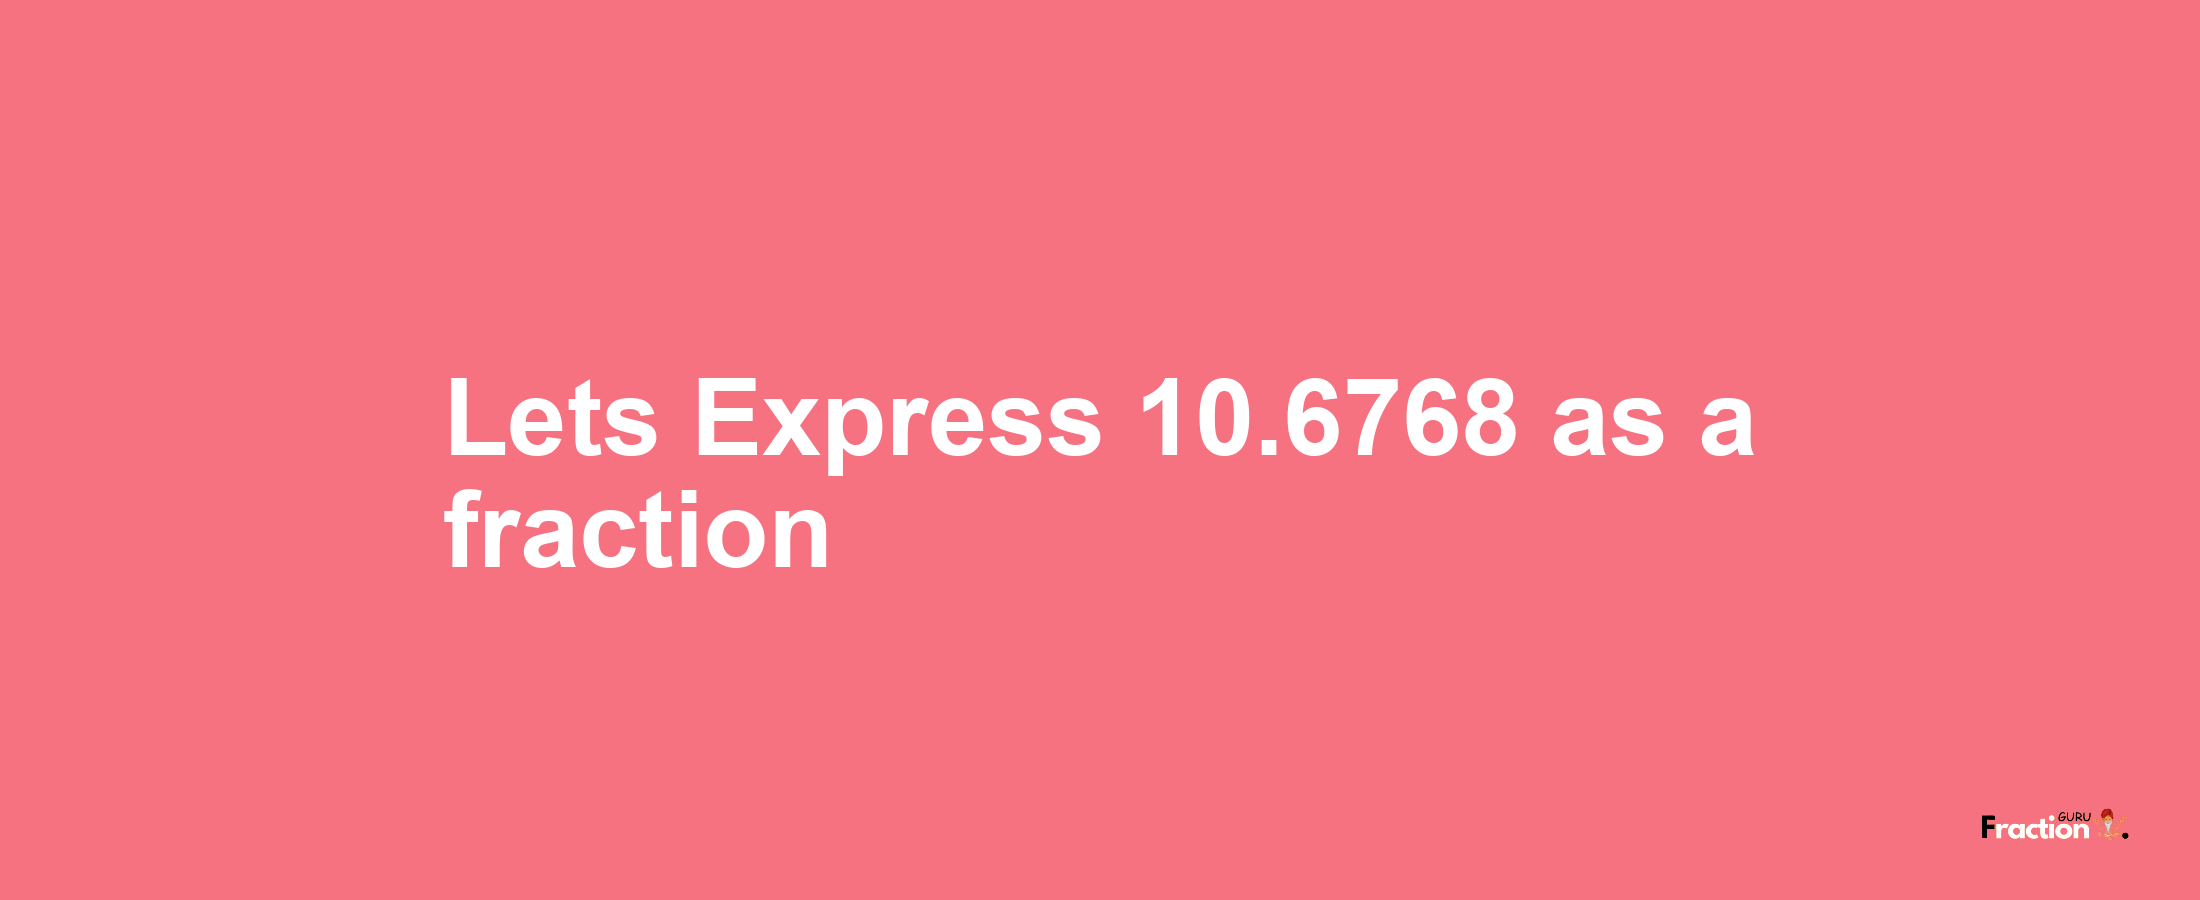 Lets Express 10.6768 as afraction